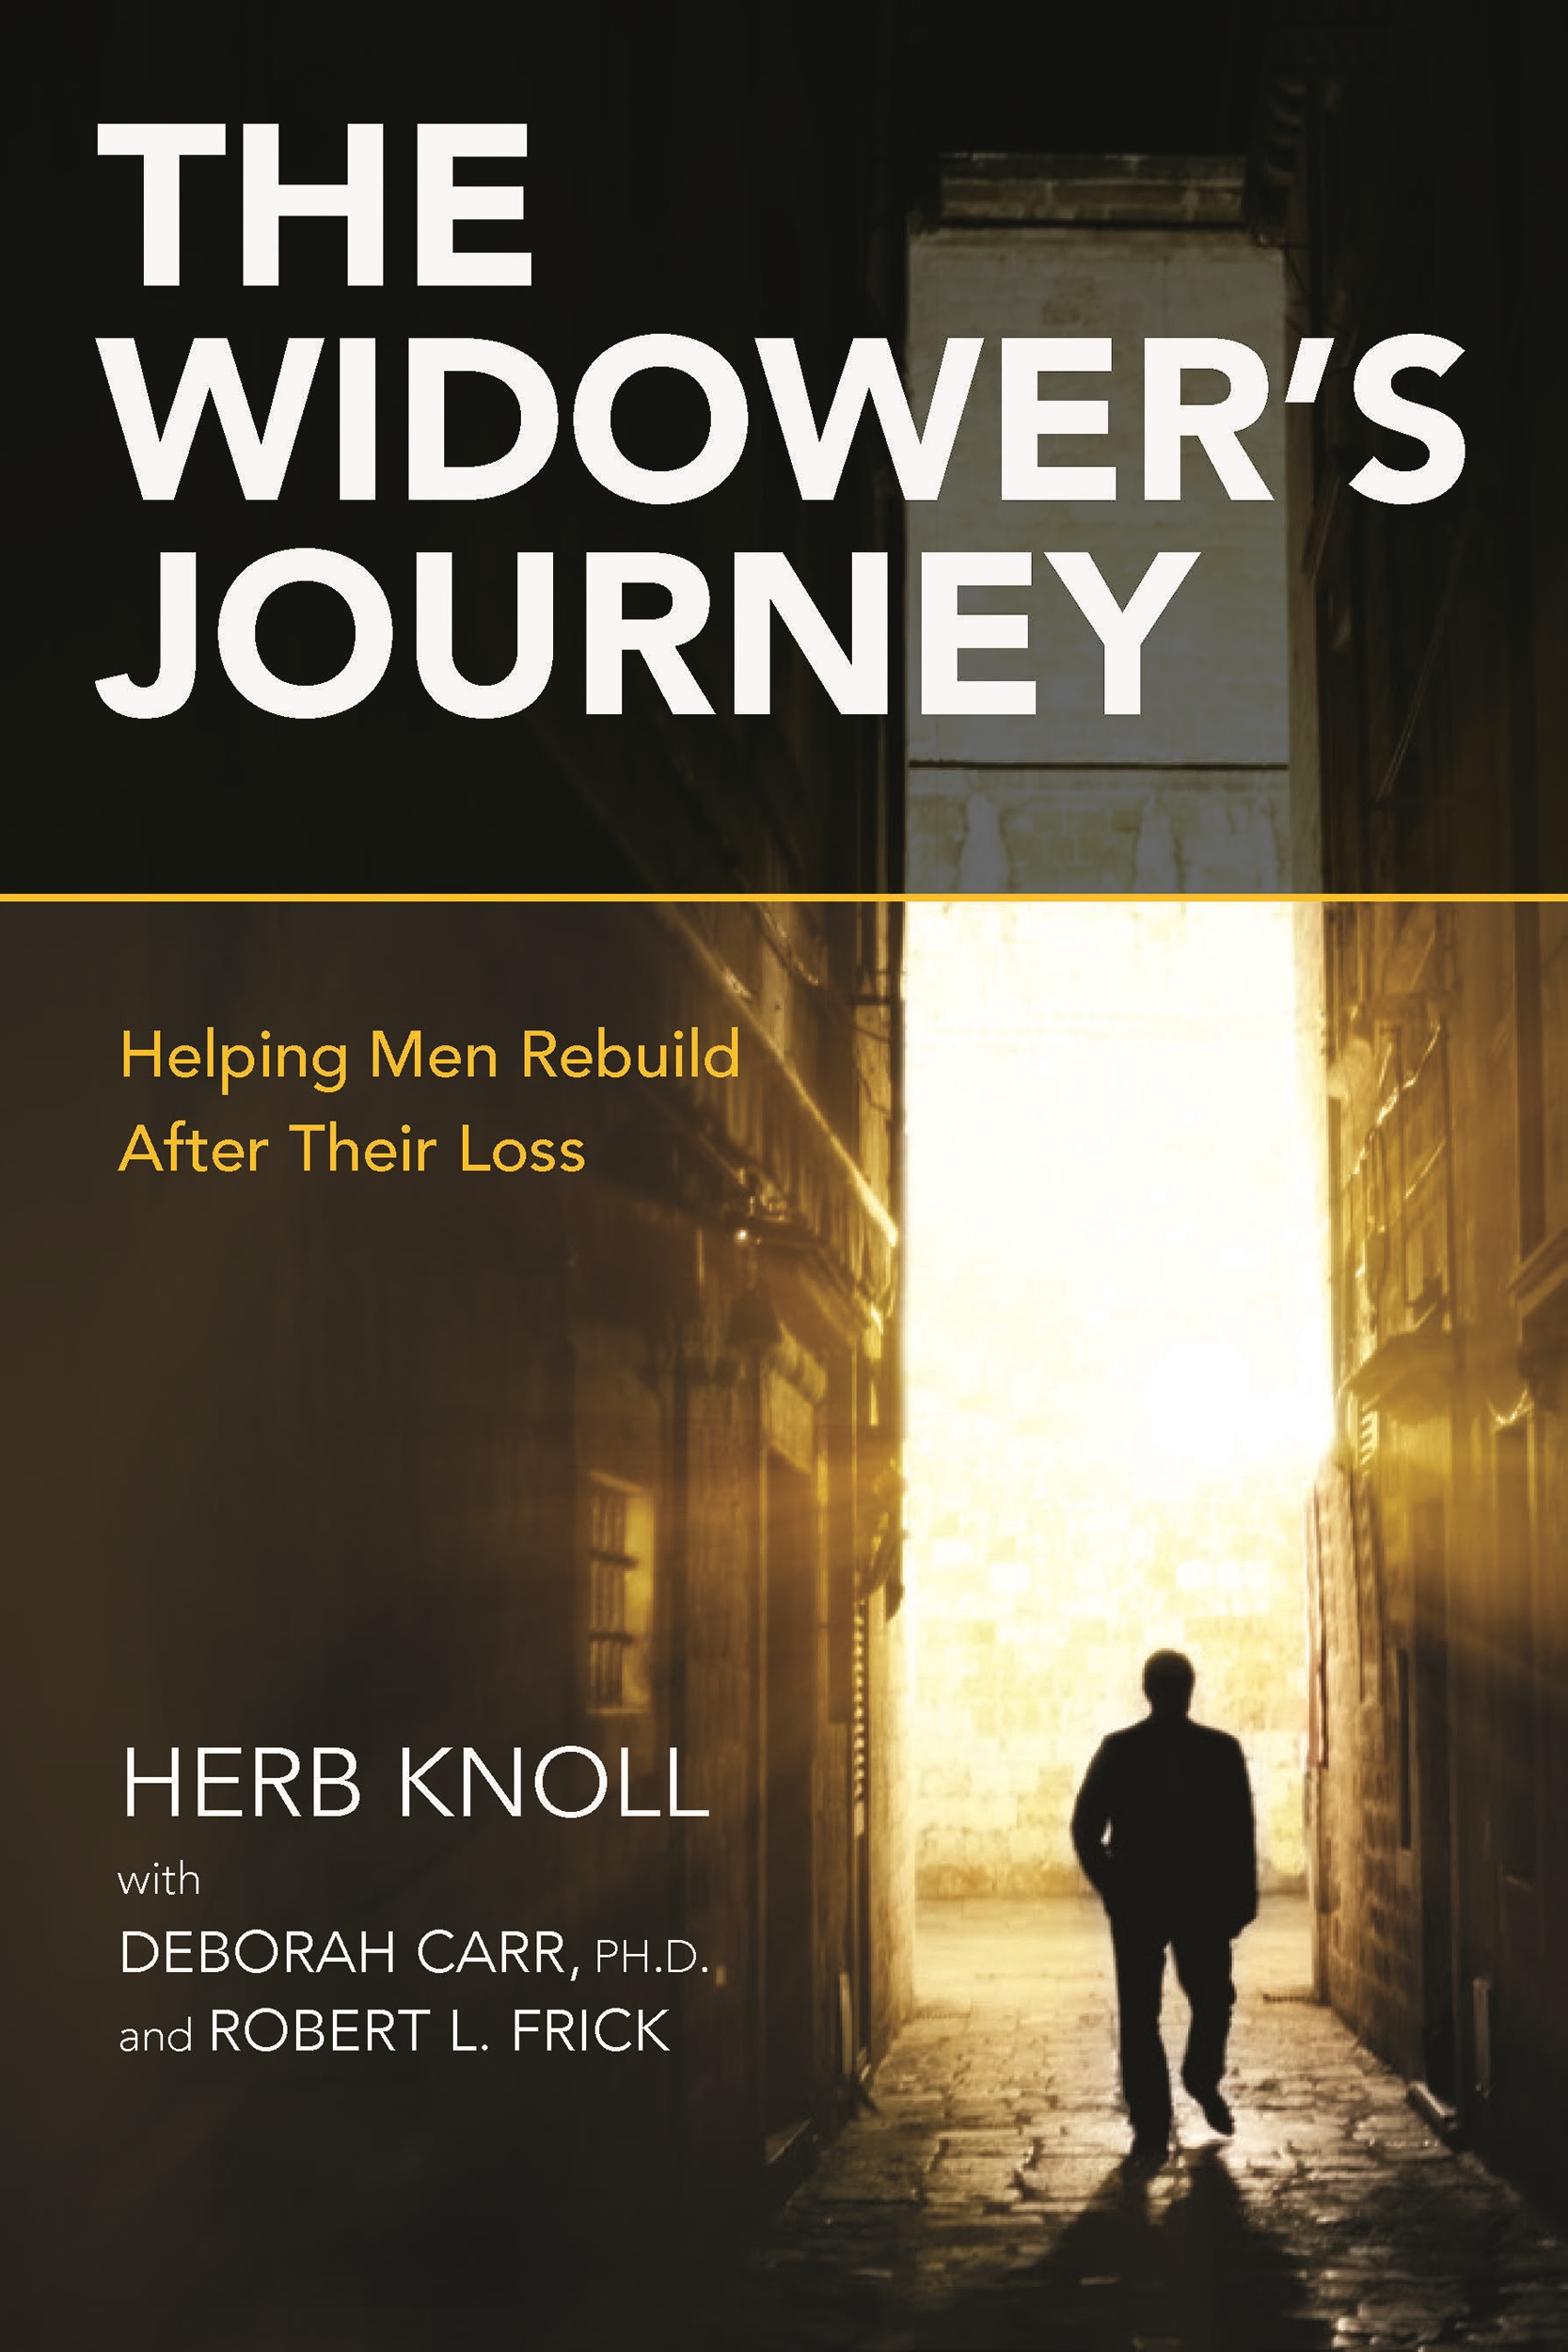 After nine years of research and writing, The Widower’s Journey has evolved into THE resource for helping men transition after the death of their spouse.